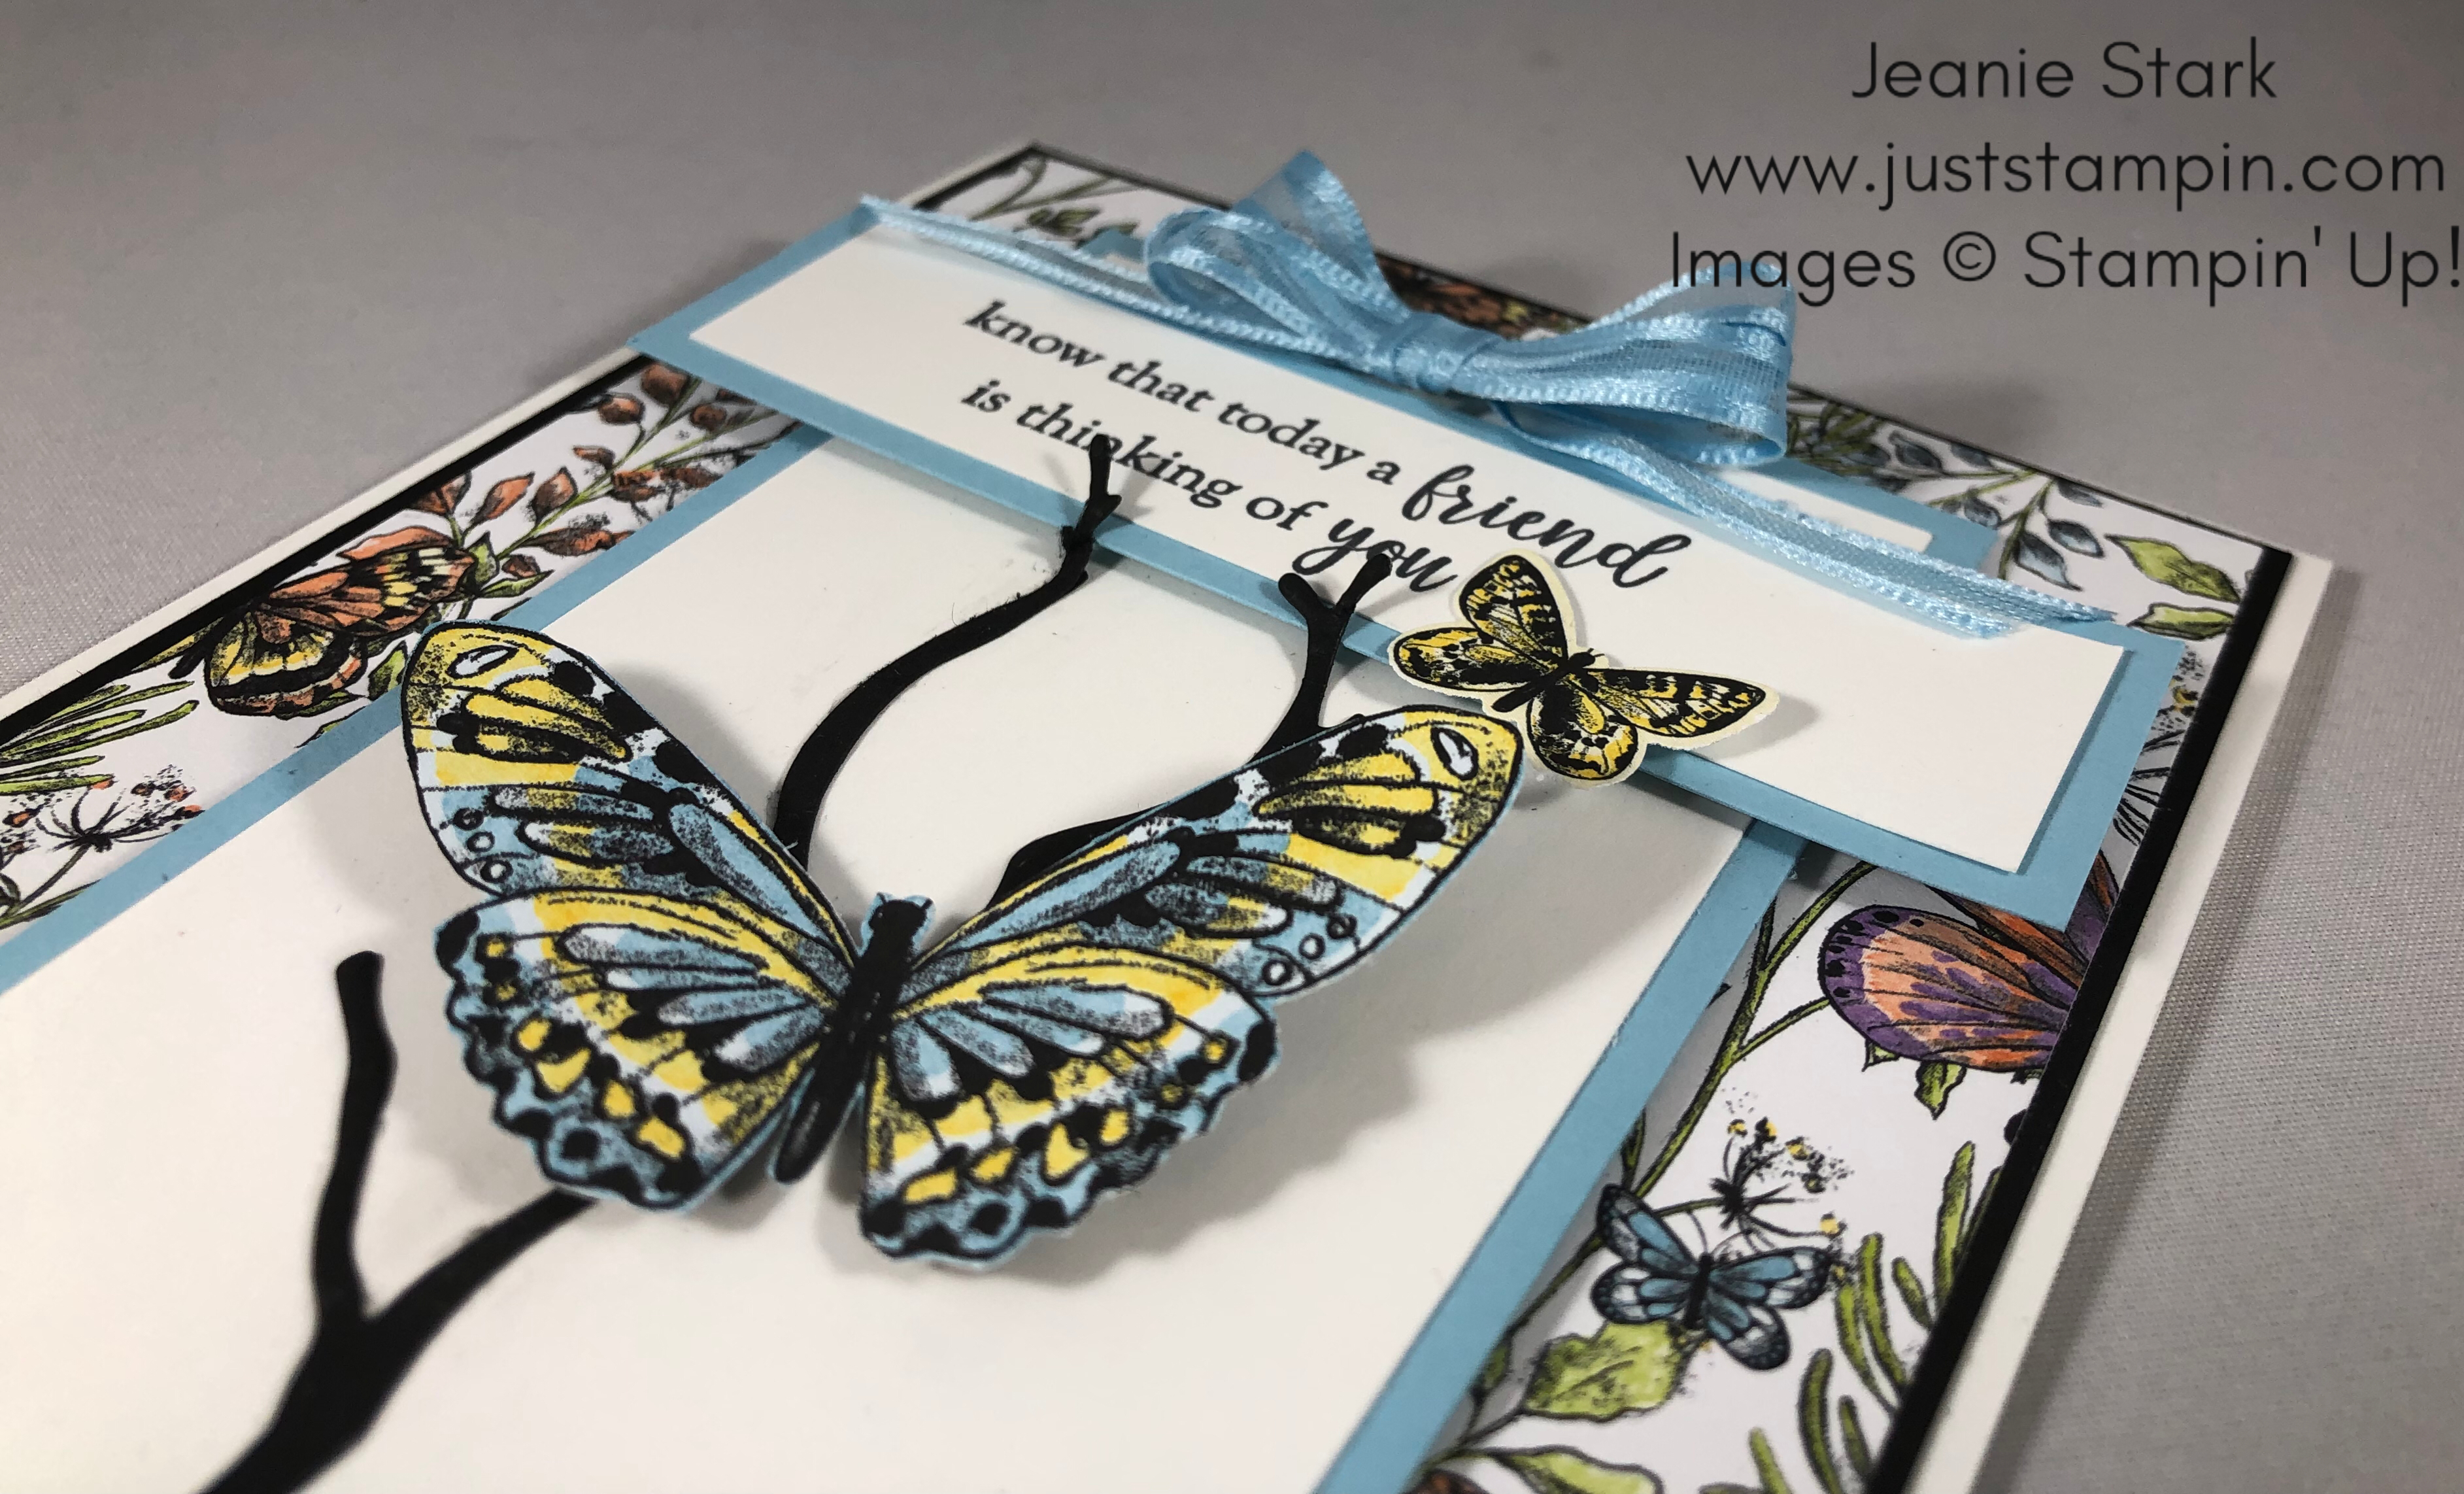 Stampin Up friend card idea using Botanical Butterfly Designer Series Paper and Part of My Story Stamp Set - Jeanie Stark StampinUp